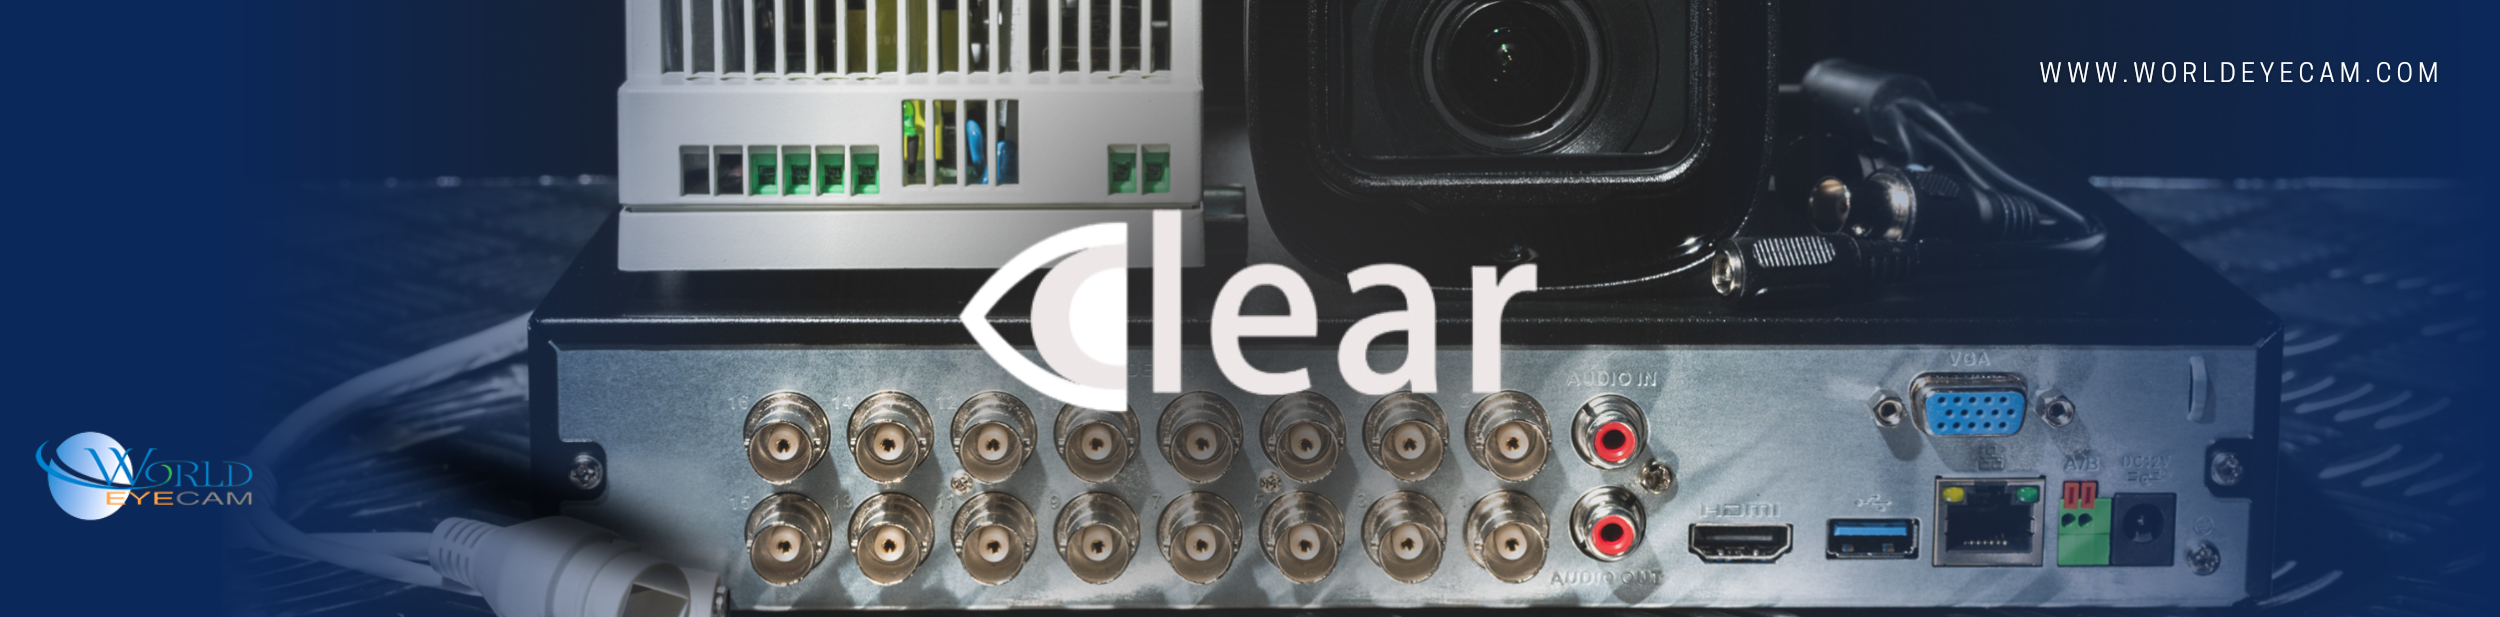 CLEAR - IP Camera Systems